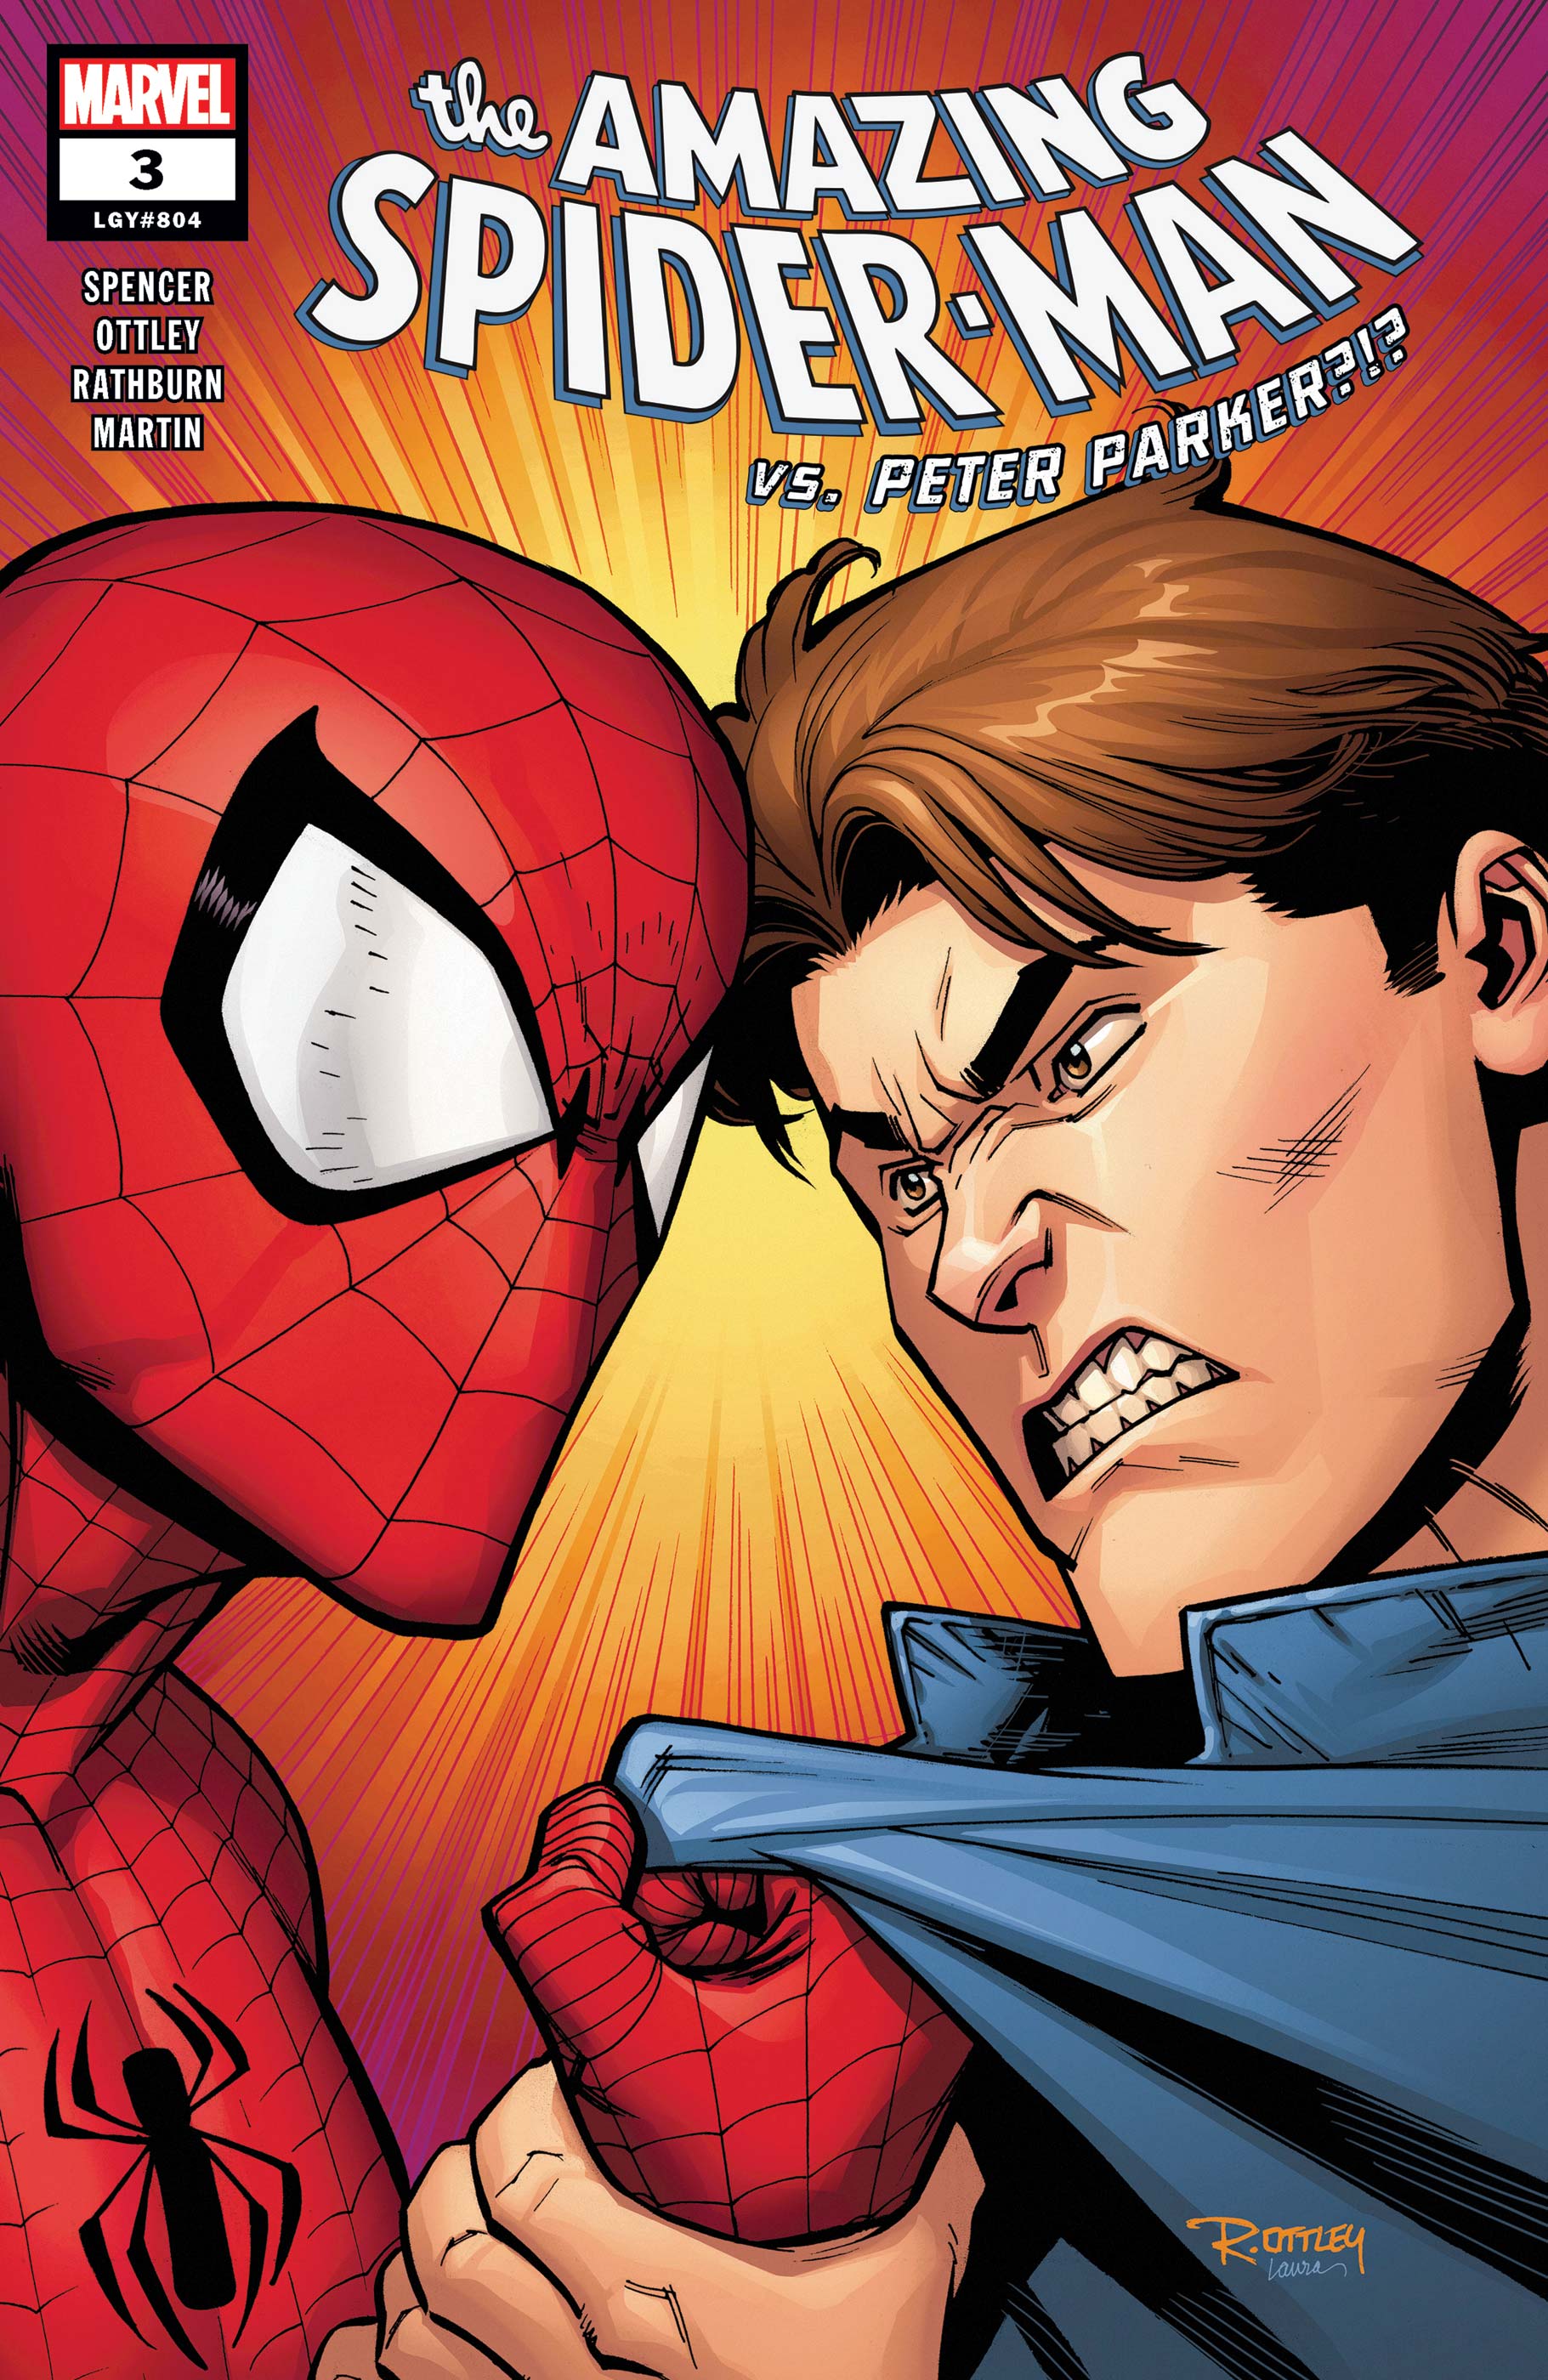 Image result for amazing spider man issue 3 ryan ottley